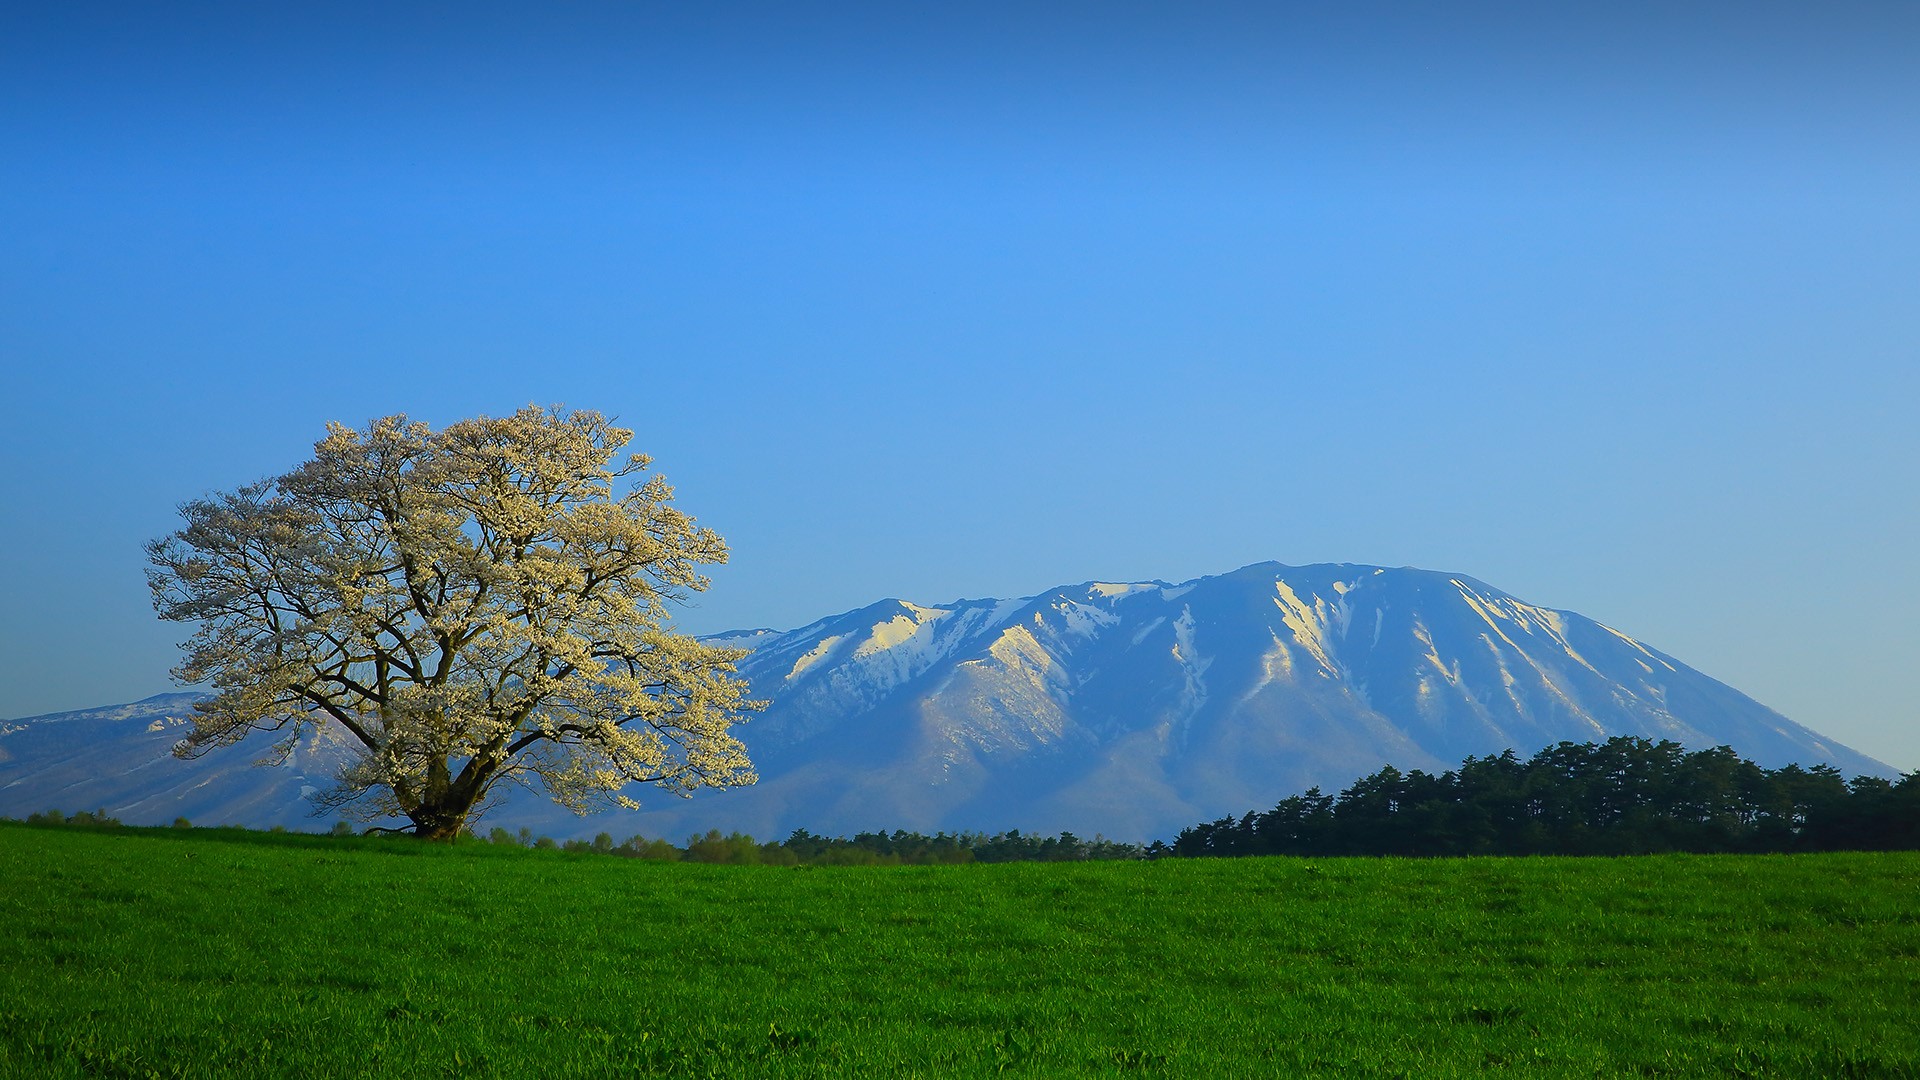 Grass Nature Landscape Clear Sky Mountains Trees Field Spring Yoshino Cherries Food T Hoku Japan 1920x1080